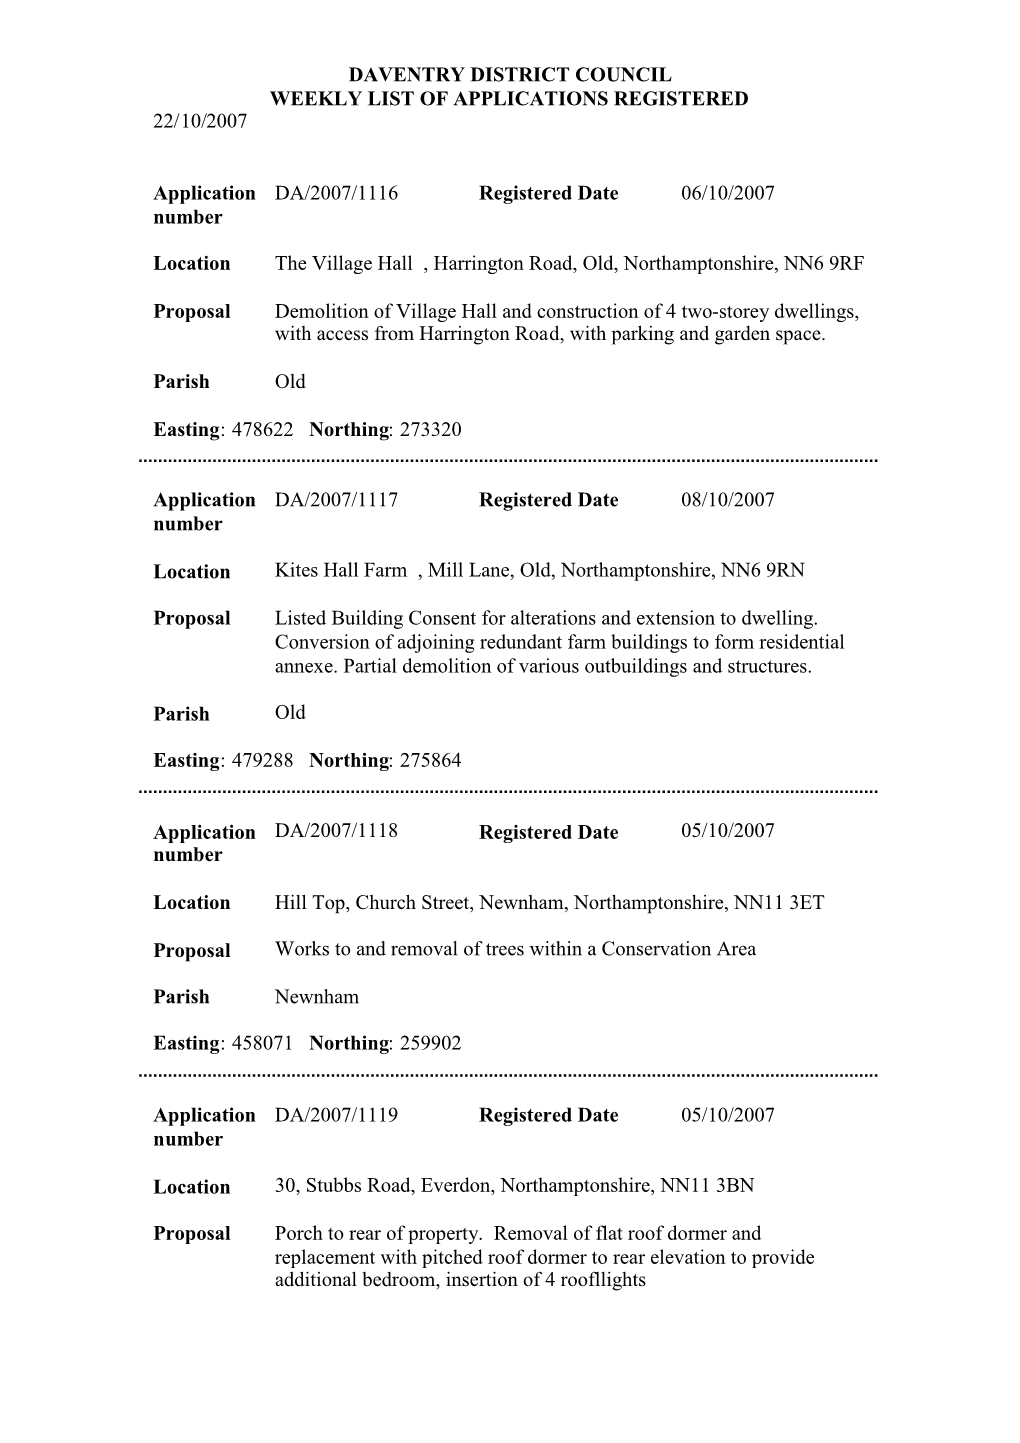 Daventry District Council Weekly List of Applications Registered 22/10/2007